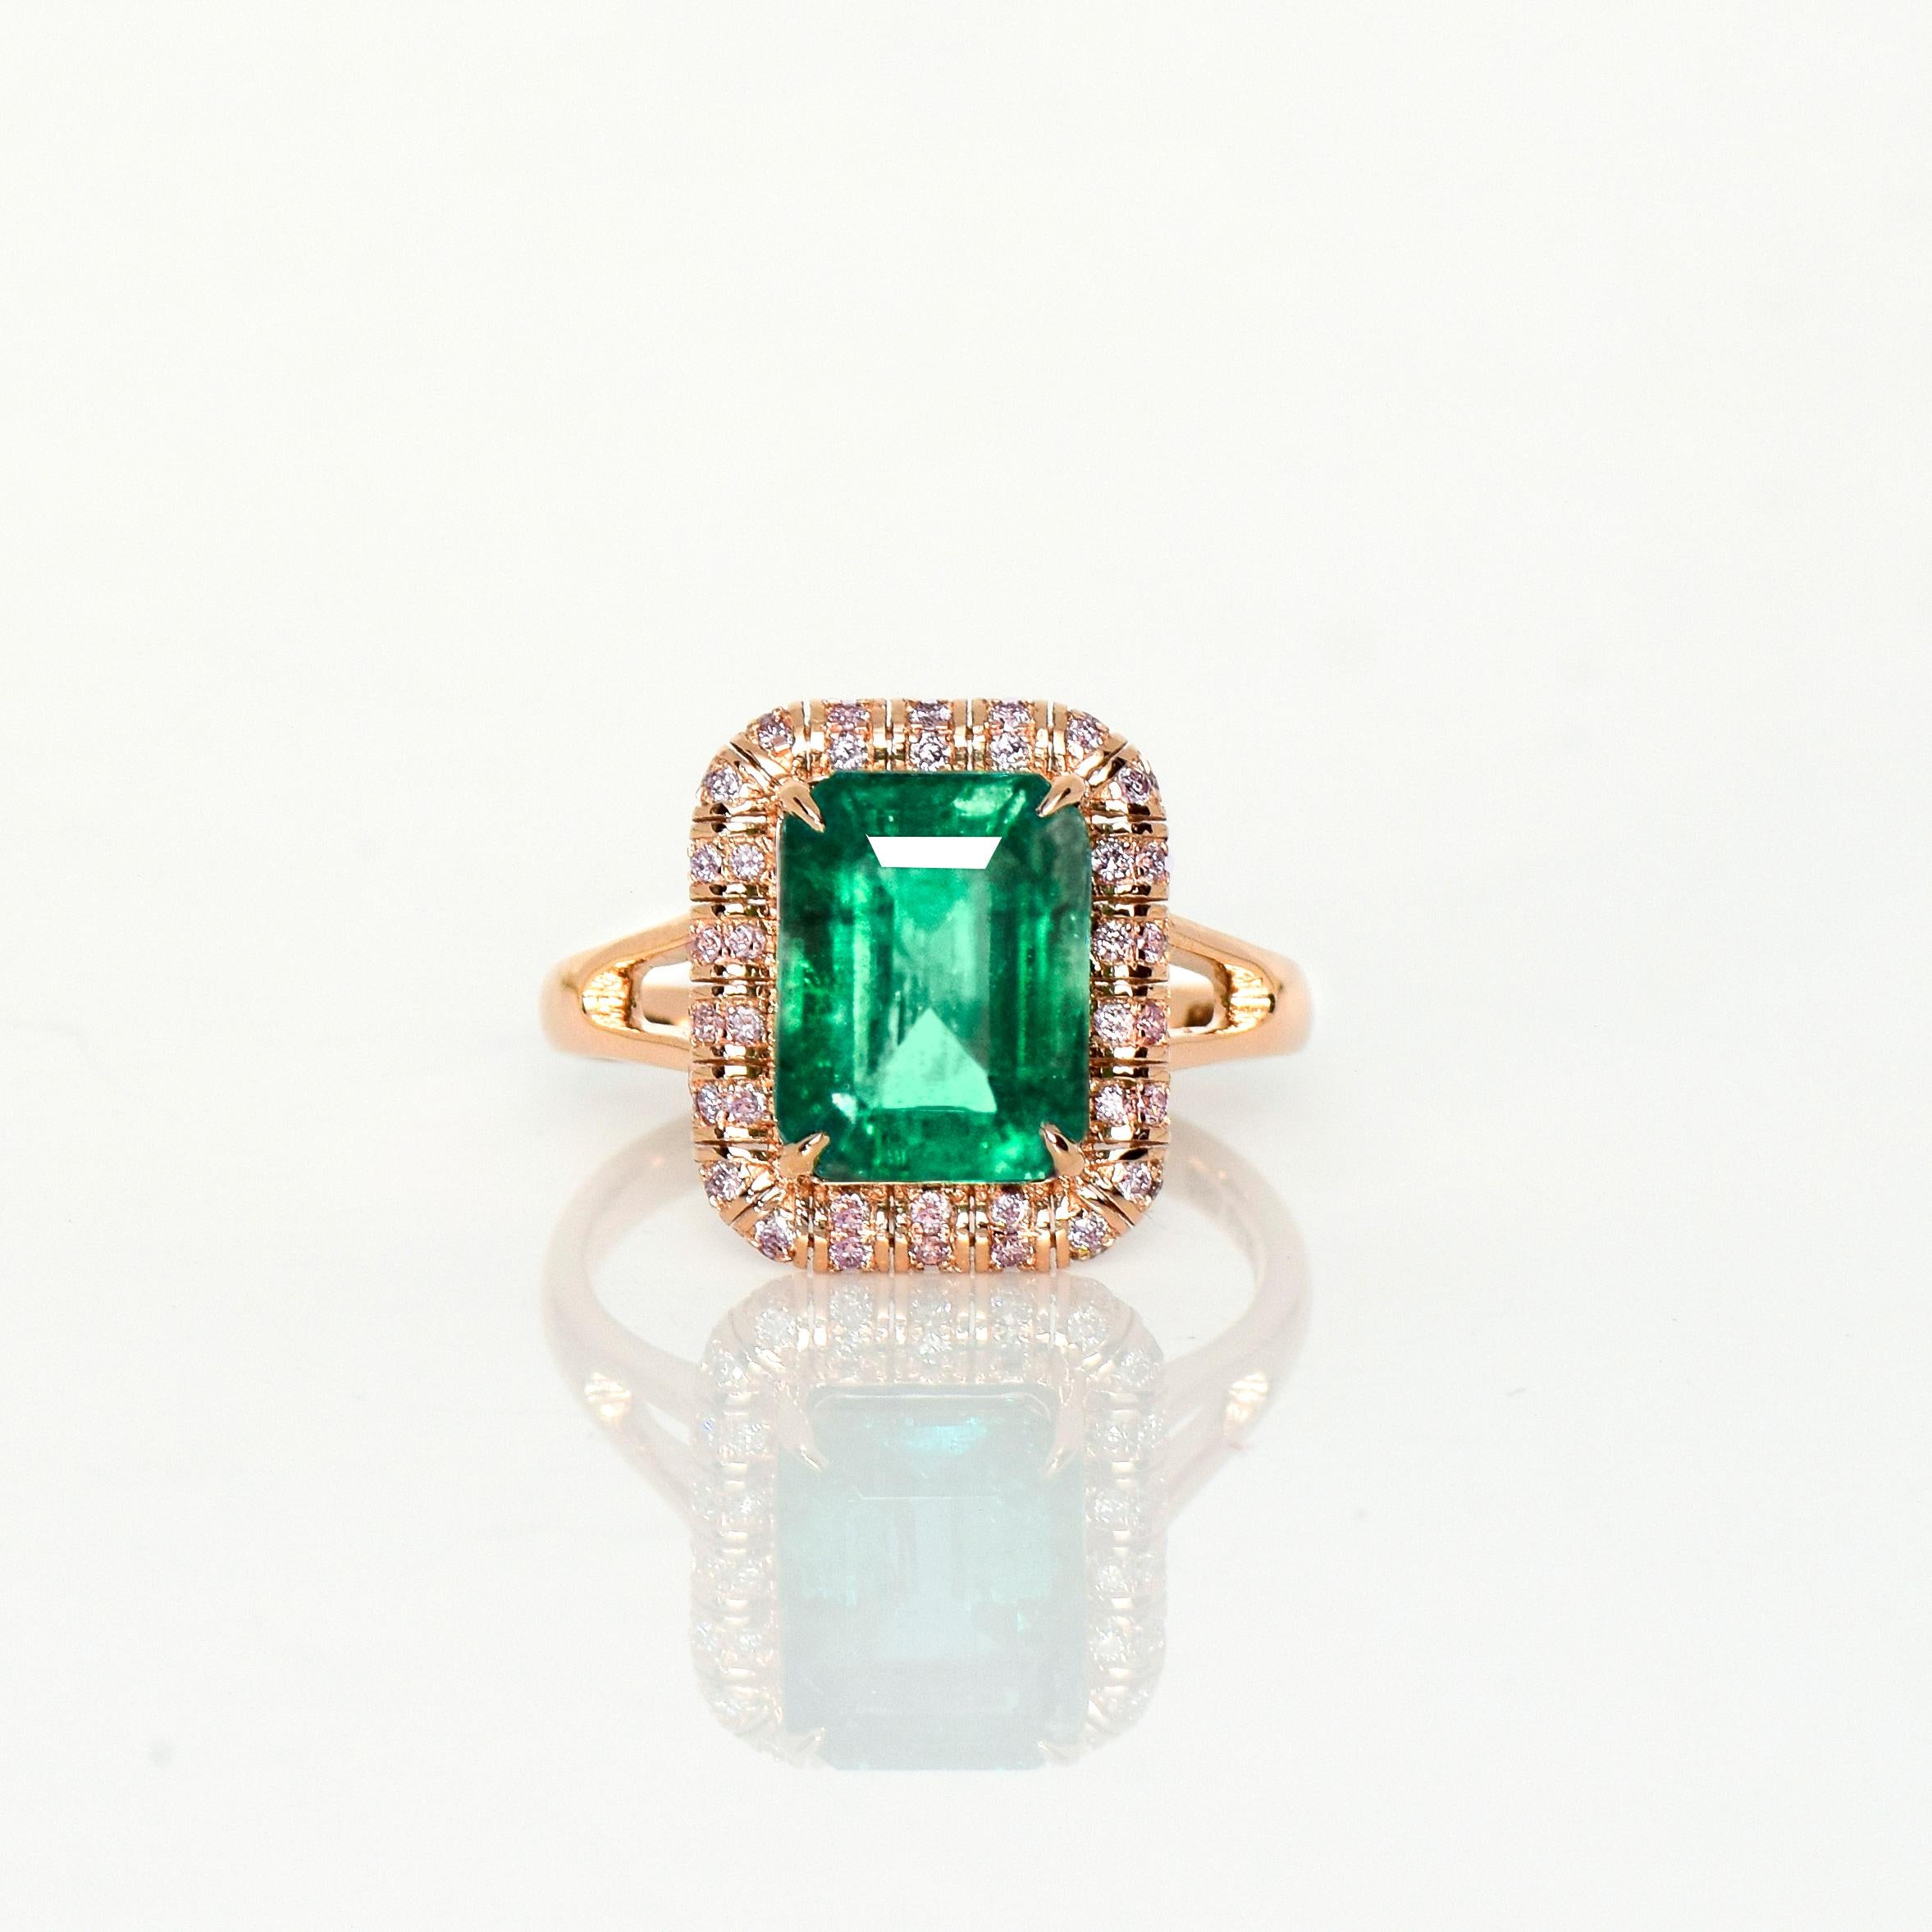 *IGI 14K 3.55 ct Natural Green Emerald&Pink Diamond Art Deco Engagement Ring*
IGI-certified natural Zambia green emerald weighing 3.55 ct set on the 14K rose gold arc deco design band with natural pink diamonds weighing 0.23 ct. 

The good-quality